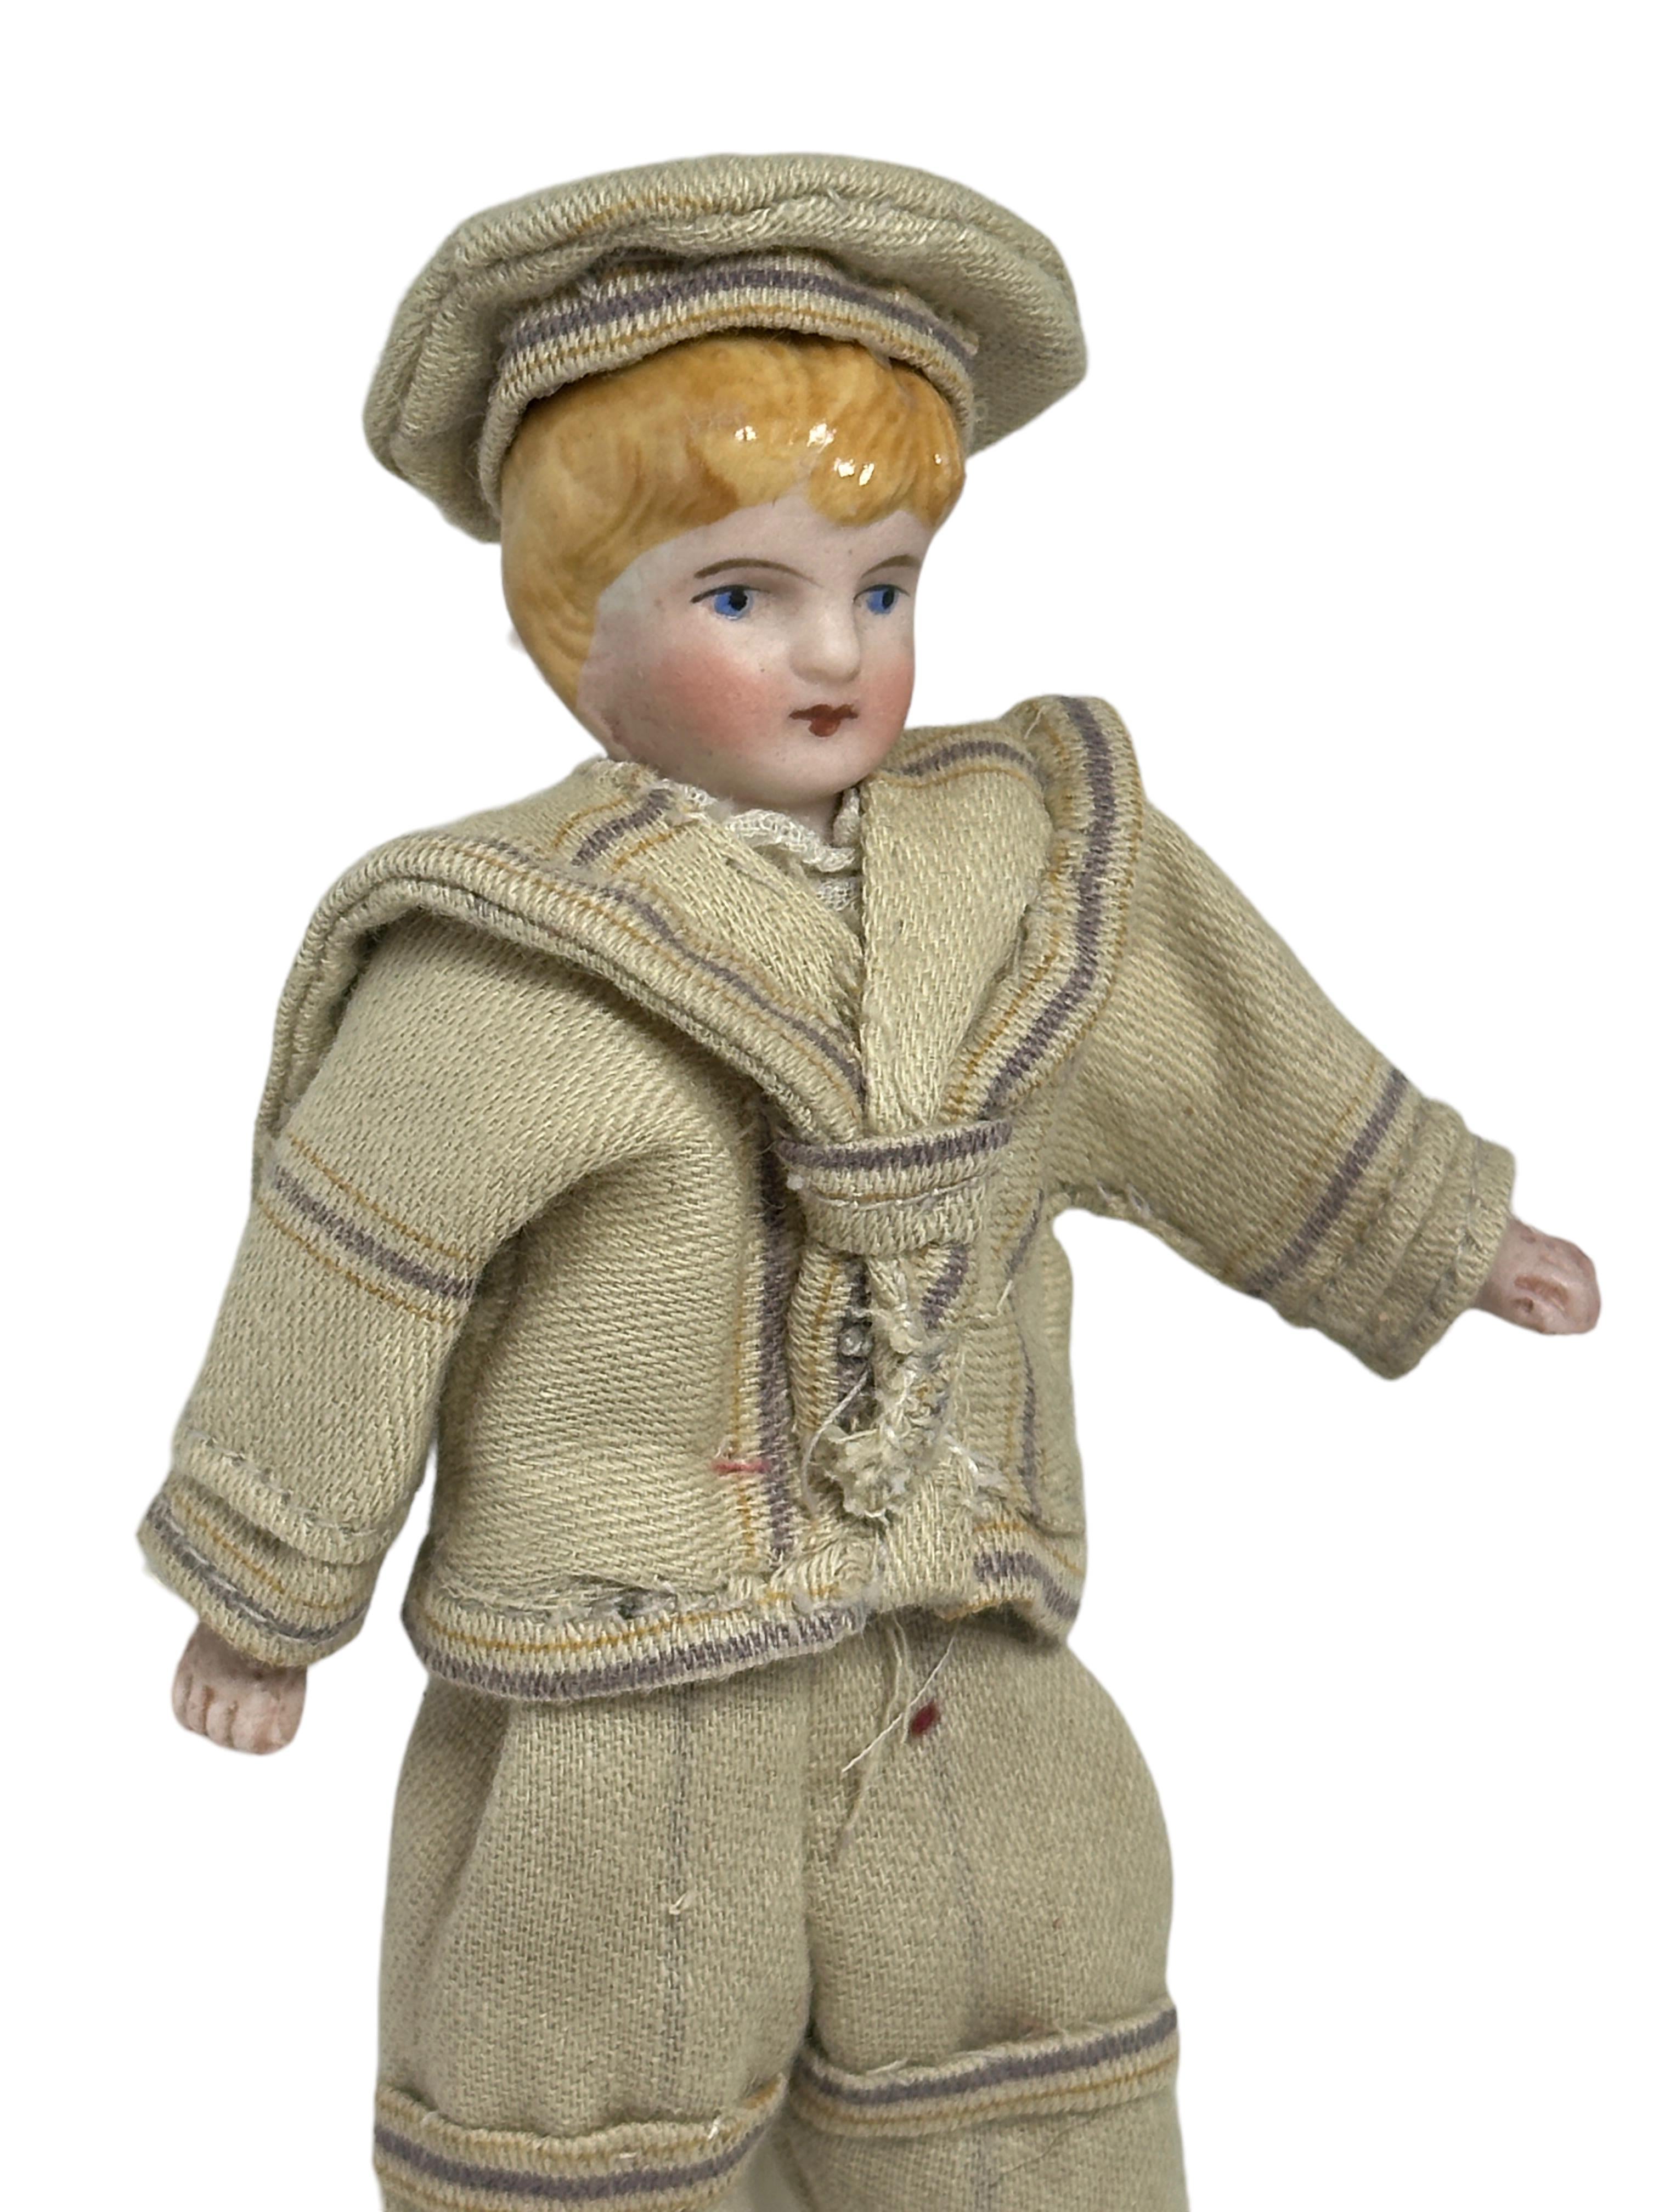 Folk Art Boy dressed in Sailor Outfit Antique German Dollhouse Doll Toy 1900s For Sale